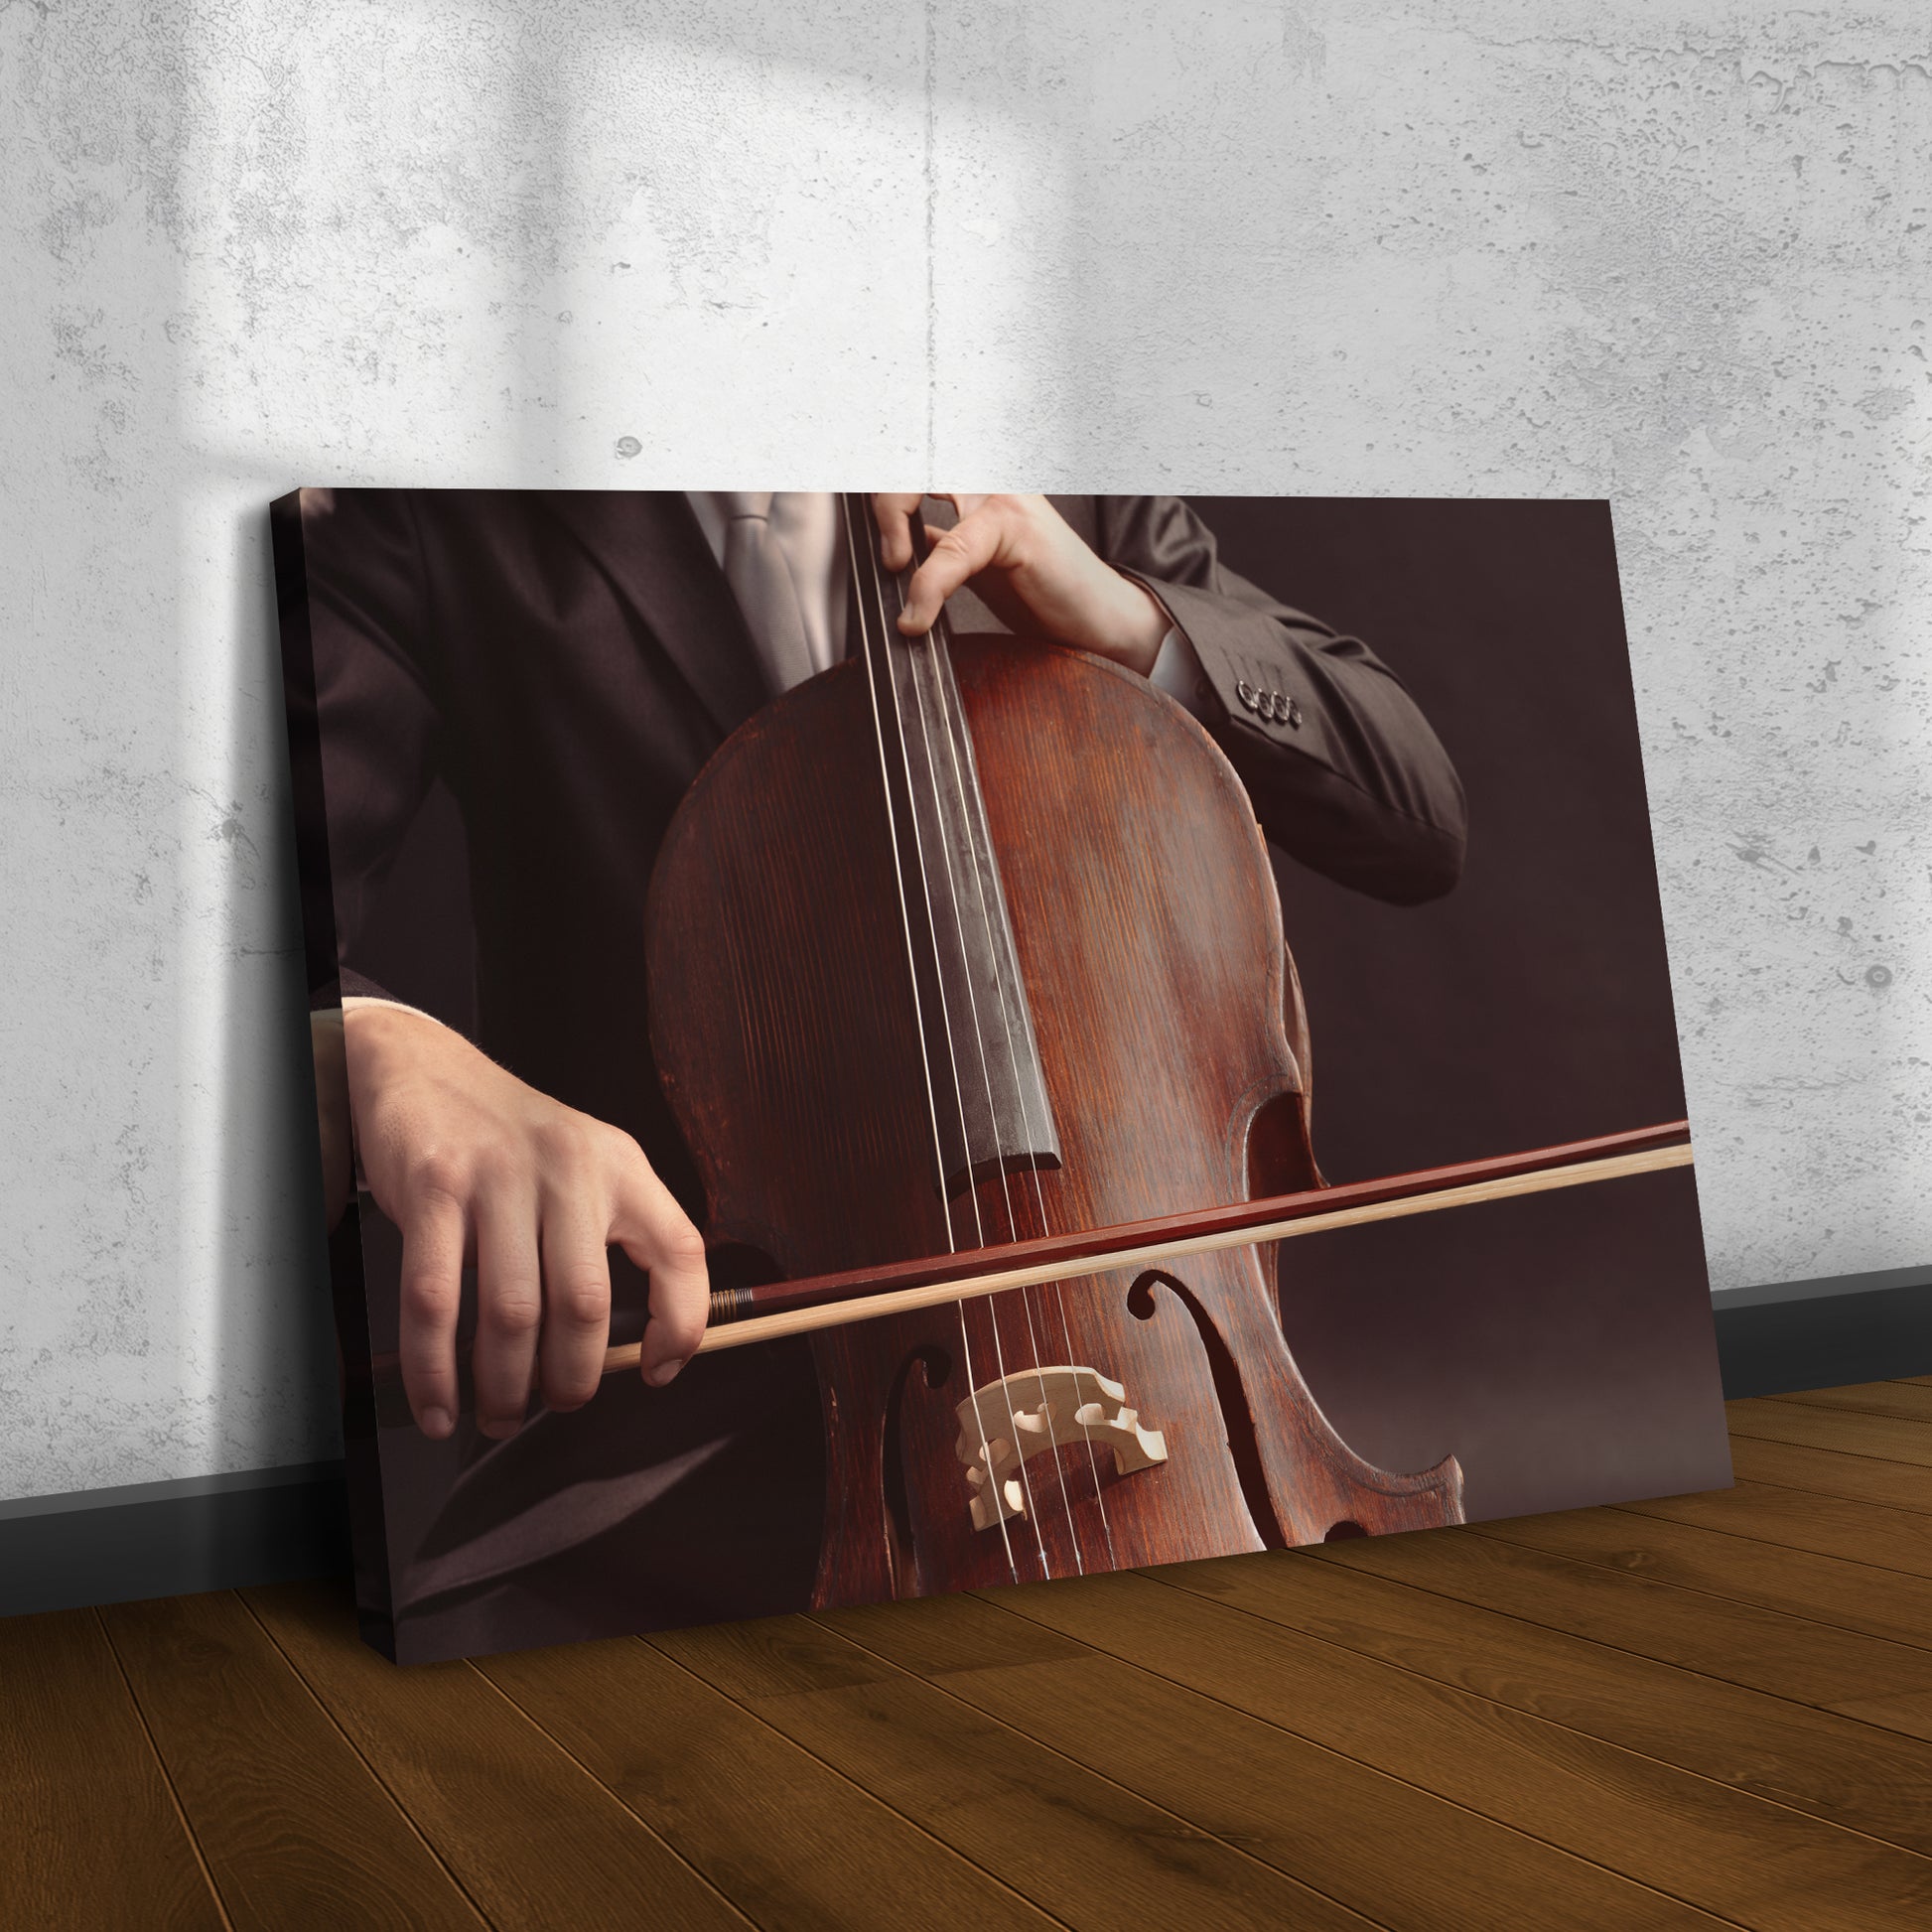 Cello Grunge Canvas Wall Art - Image by Tailored Canvases